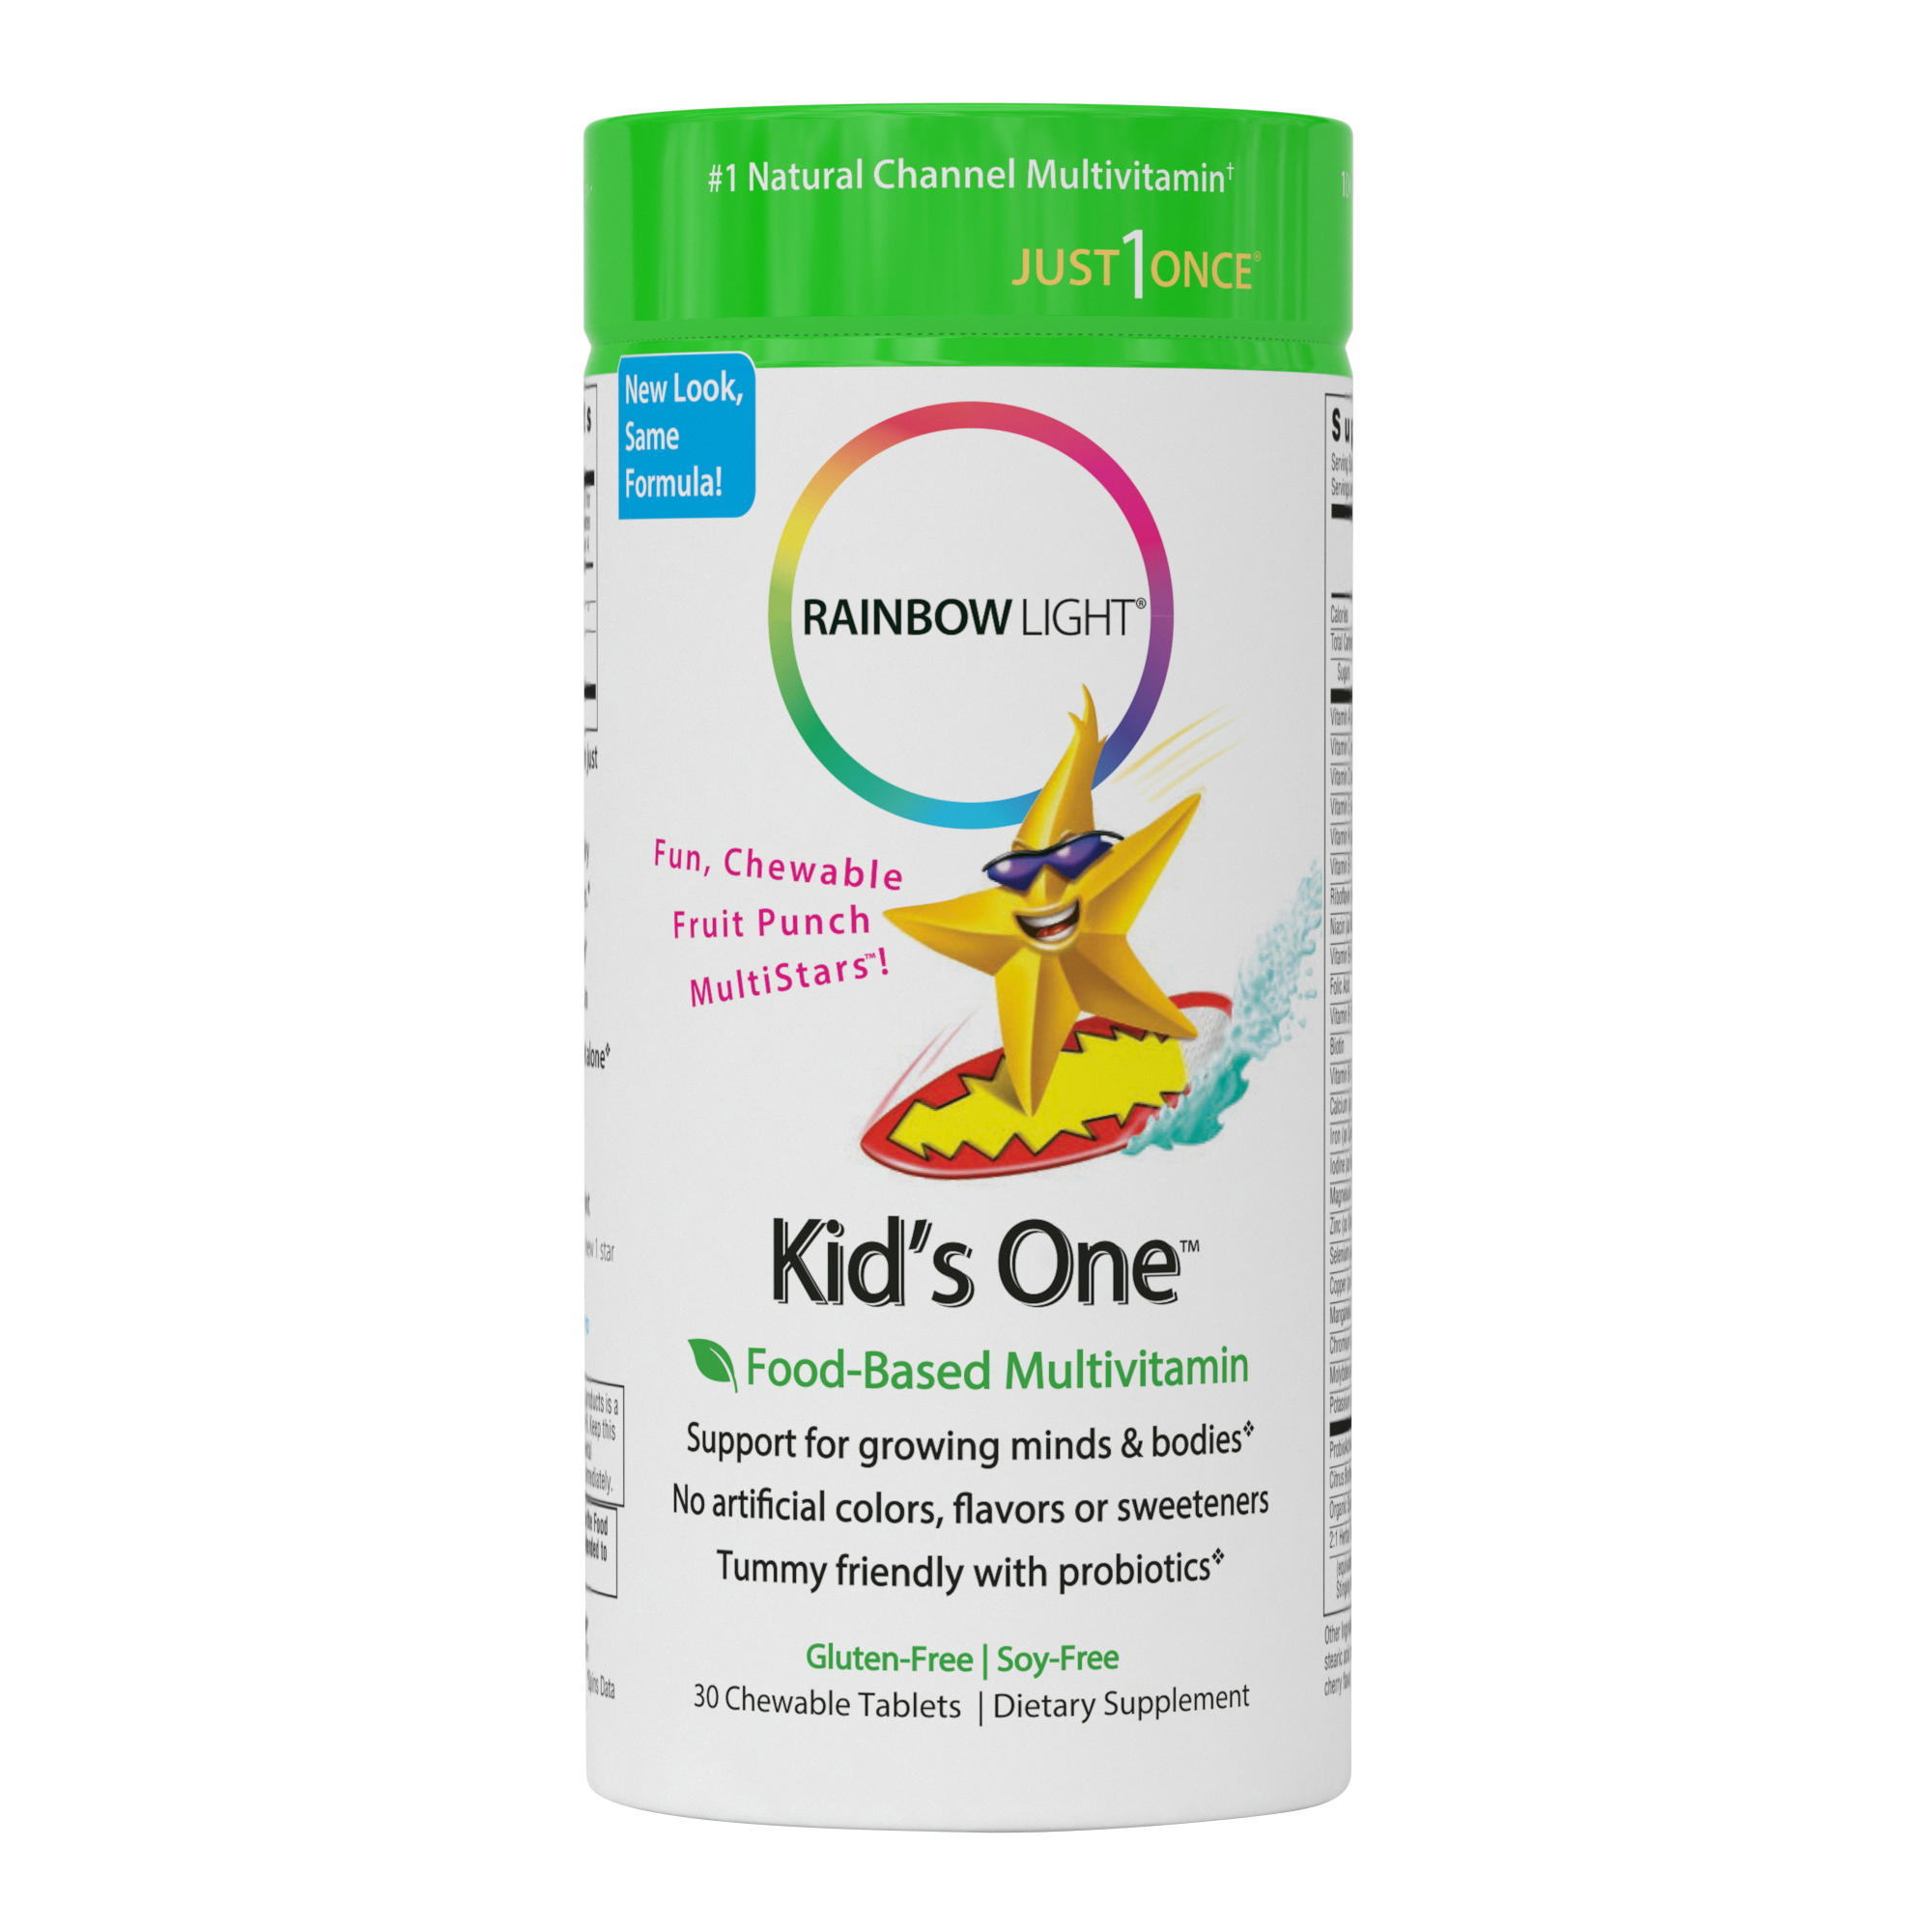 Rainbow Light Kids One, Food-Based Multivitamin, Chewable Probiotic, Vitamin, and Mineral Supplement; Soy and Gluten-Free; Supports Brain, Bone, Heart, Eye and Immune Health in Kids - 30 Tablets - image 1 of 6